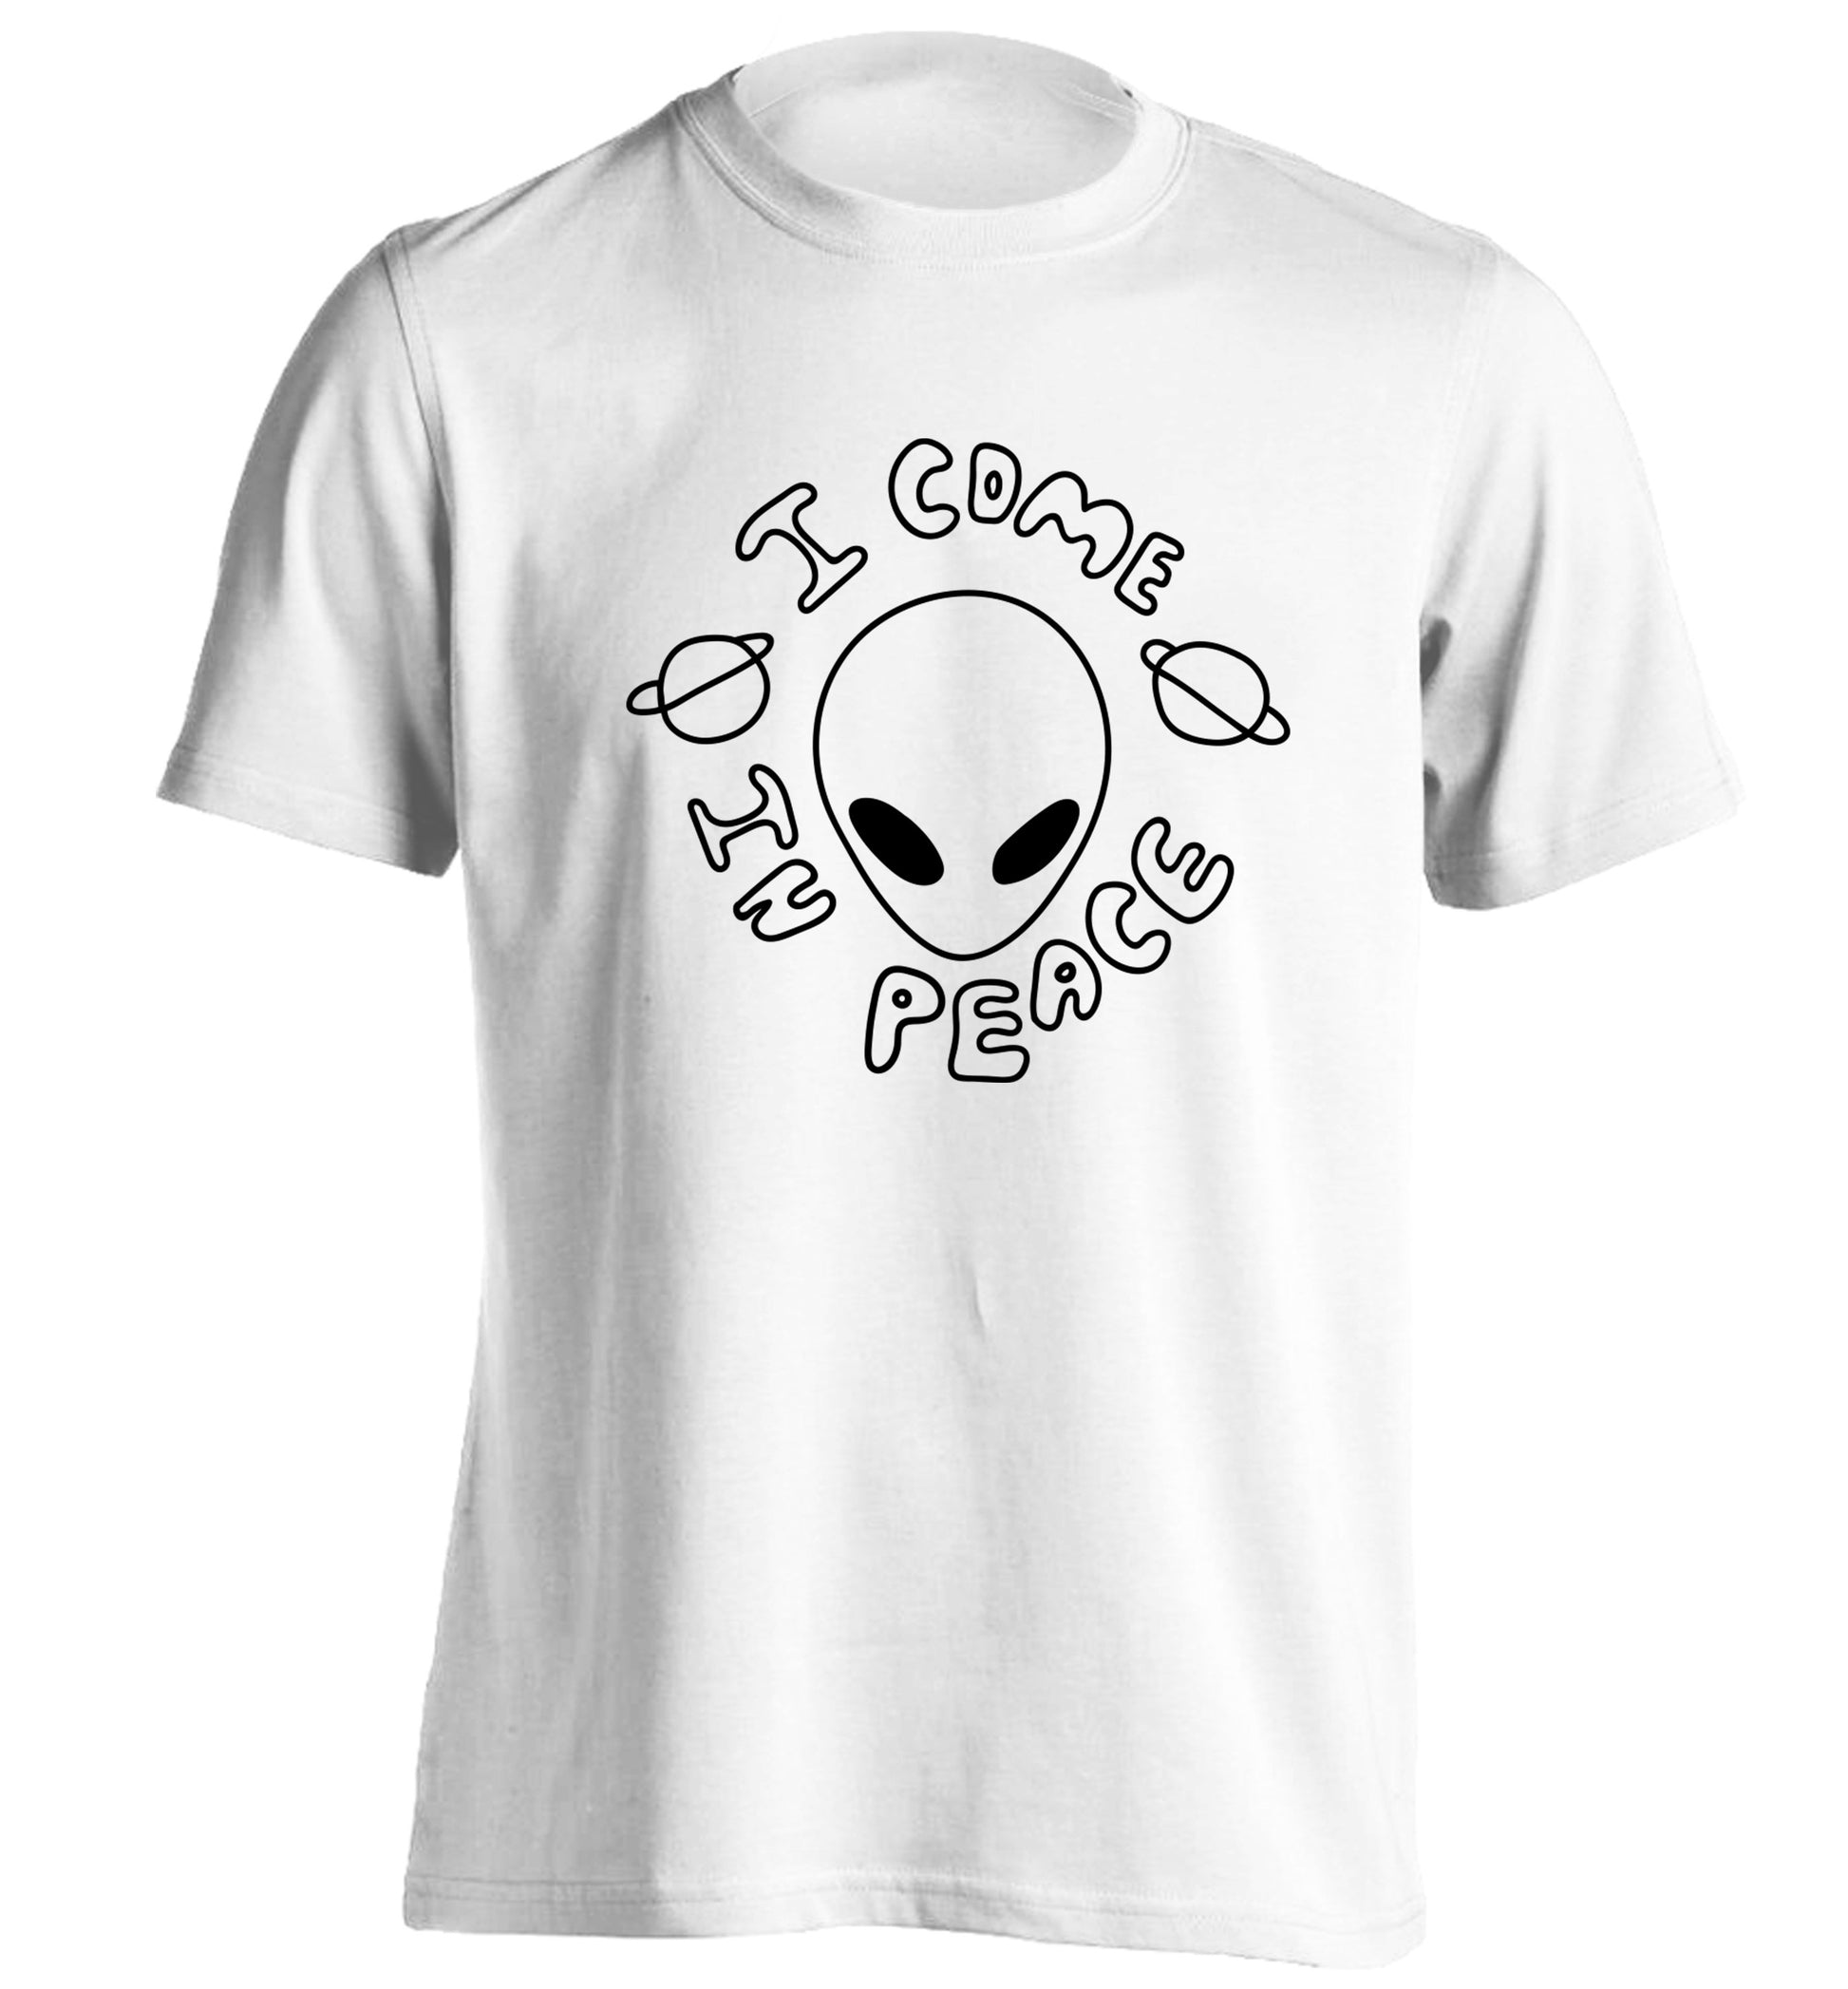 I come in peace adults unisex white Tshirt 2XL